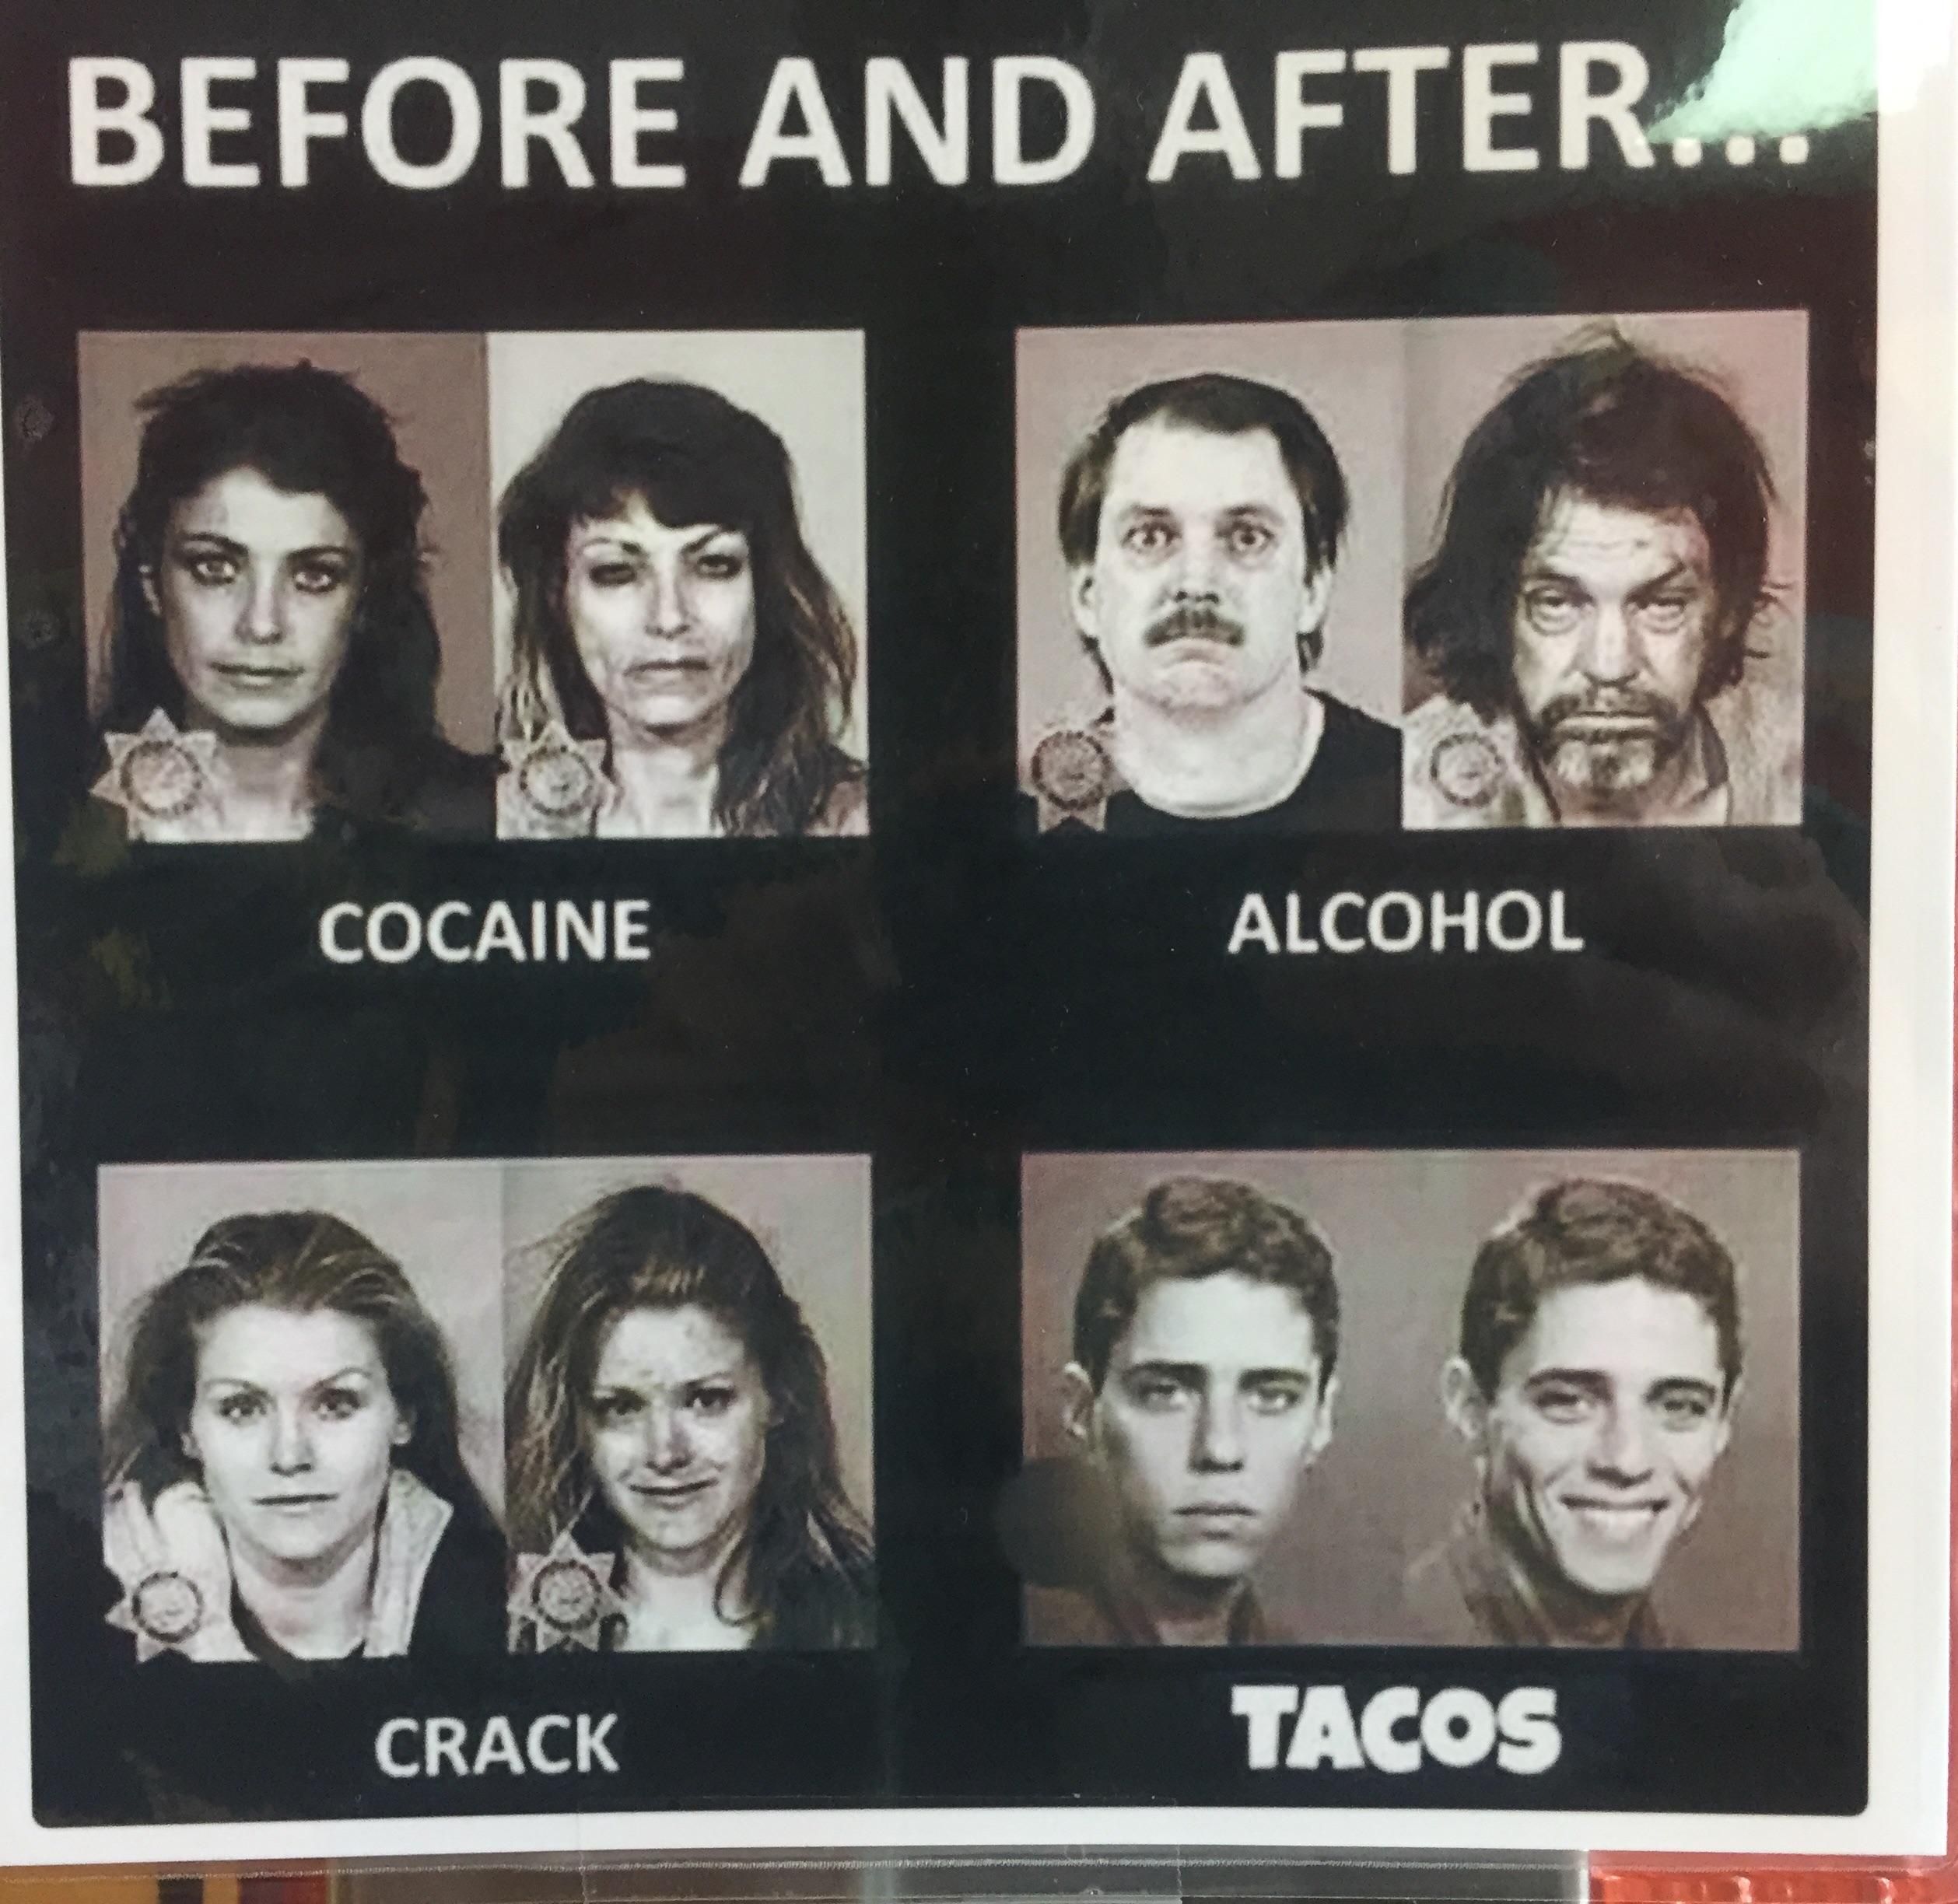 BEFORE AND AFTER...TACOS